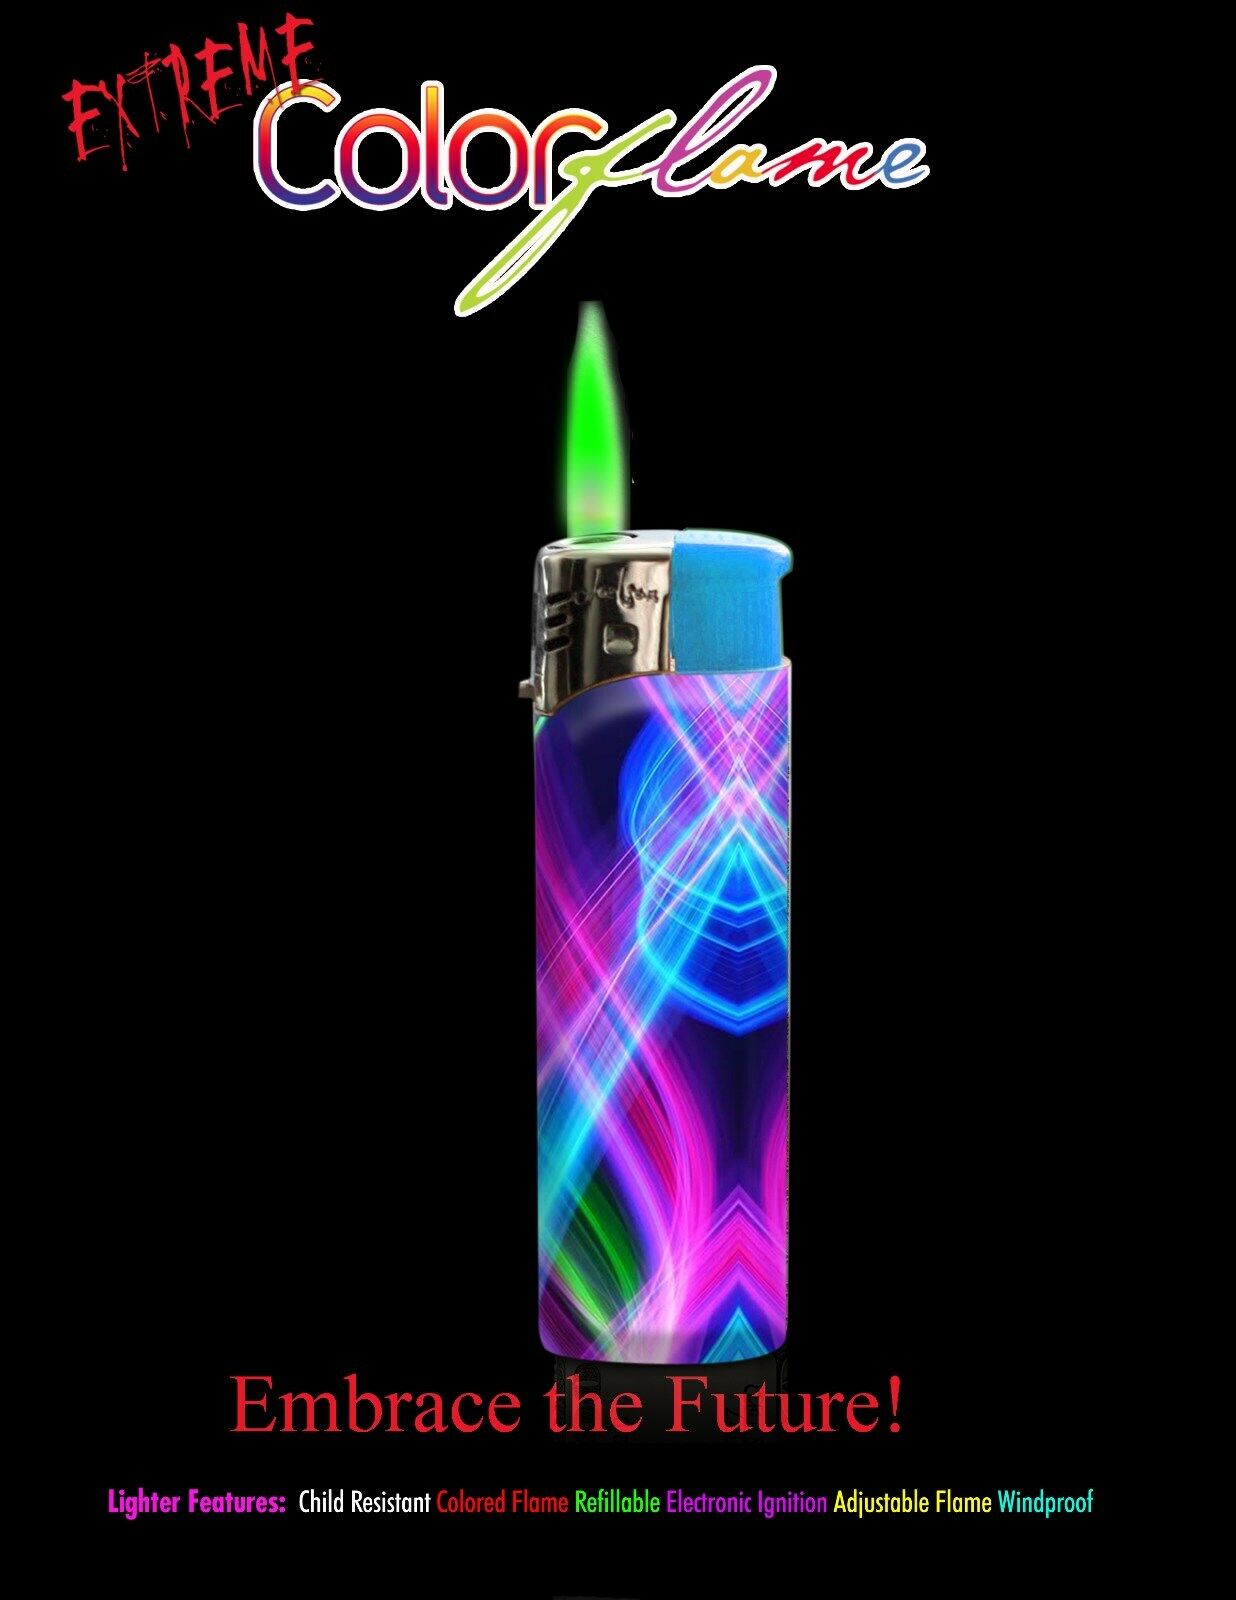 Color Flame Fire Butane Colorflame Colorful Torch Lighter Green Flame Swirl